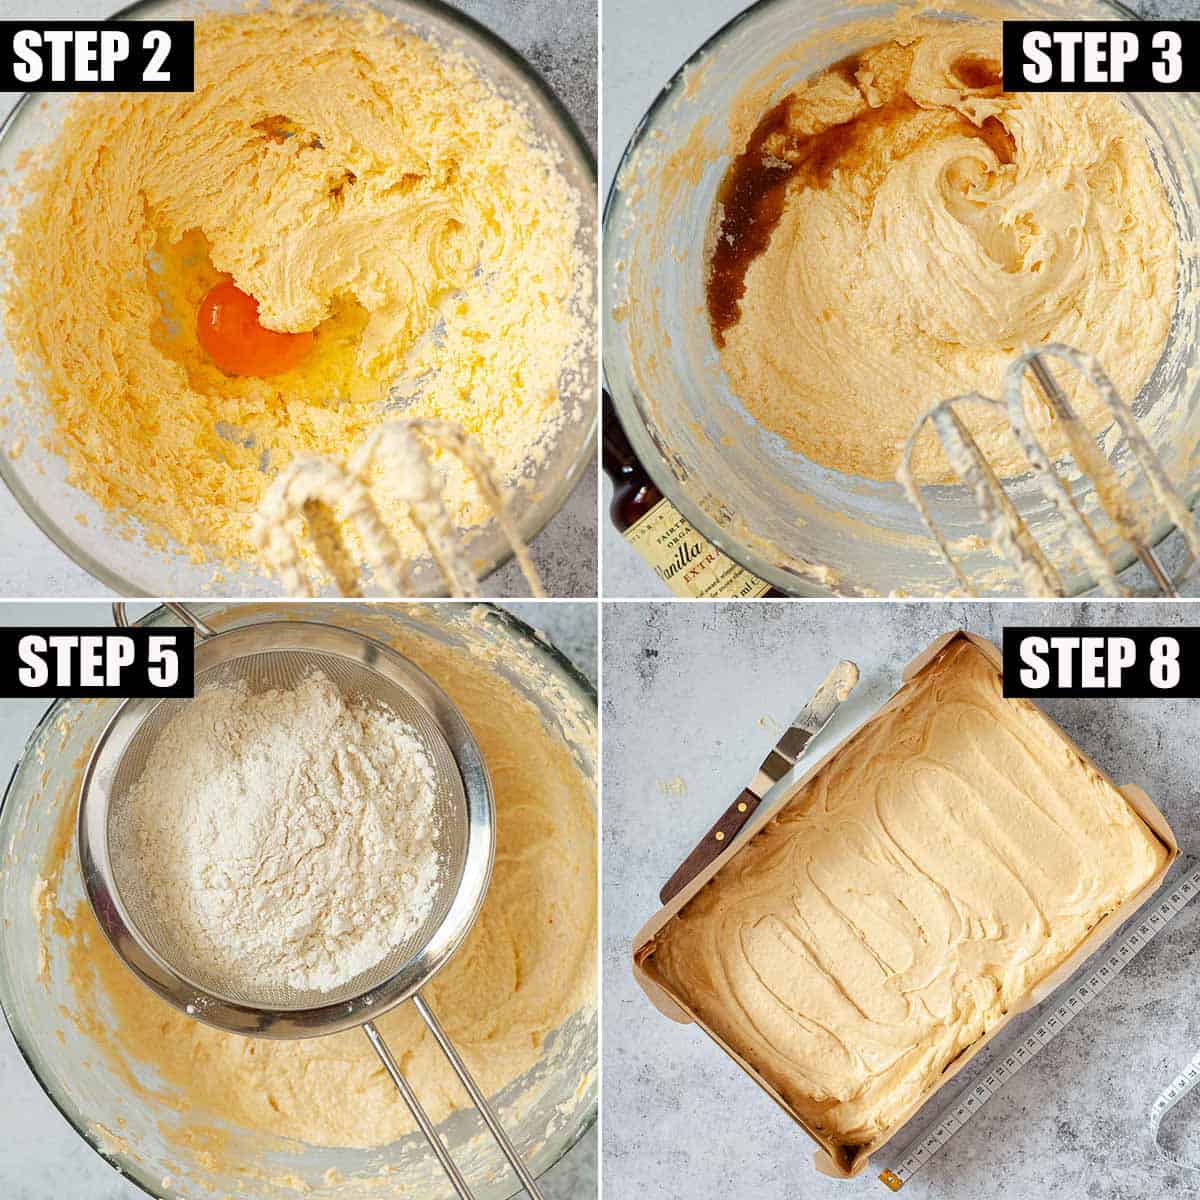 Collage of images showing cake batter being made.